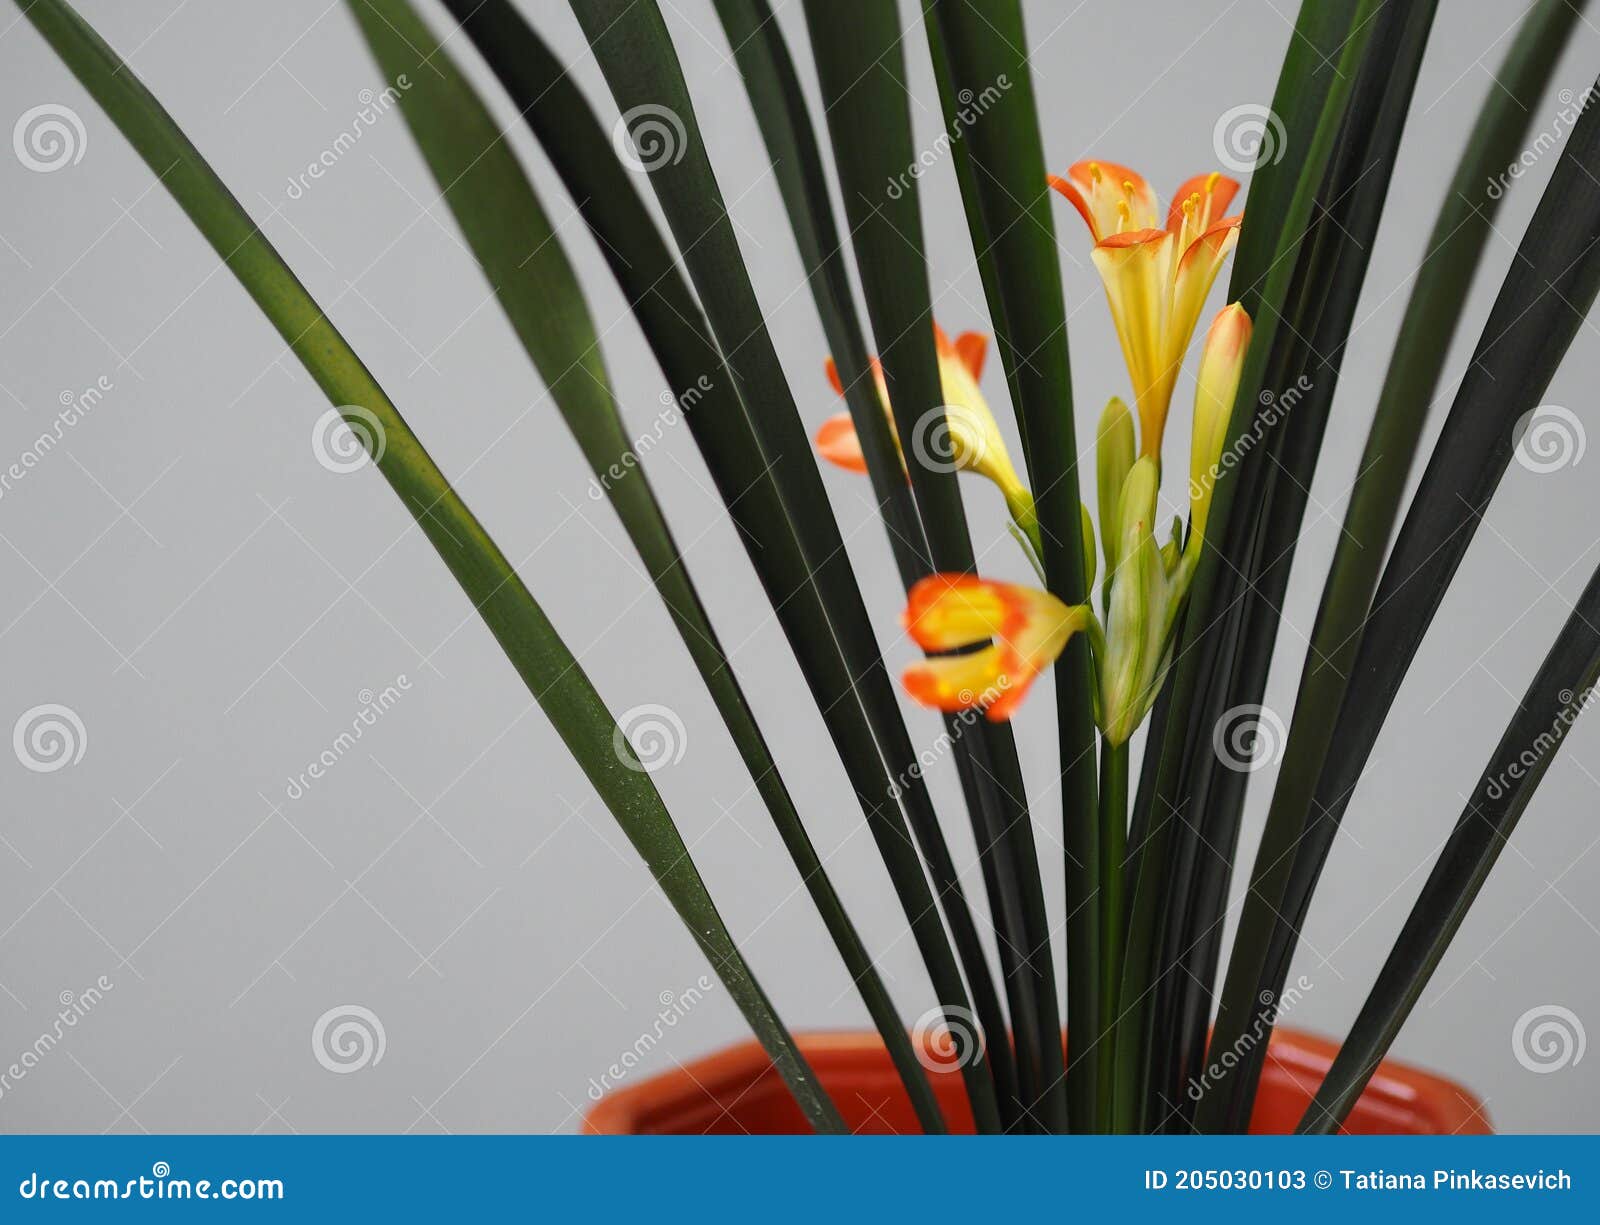 a tropical lily flower growing in a house in the northern country of russia. houseplant care. crop and floriculture